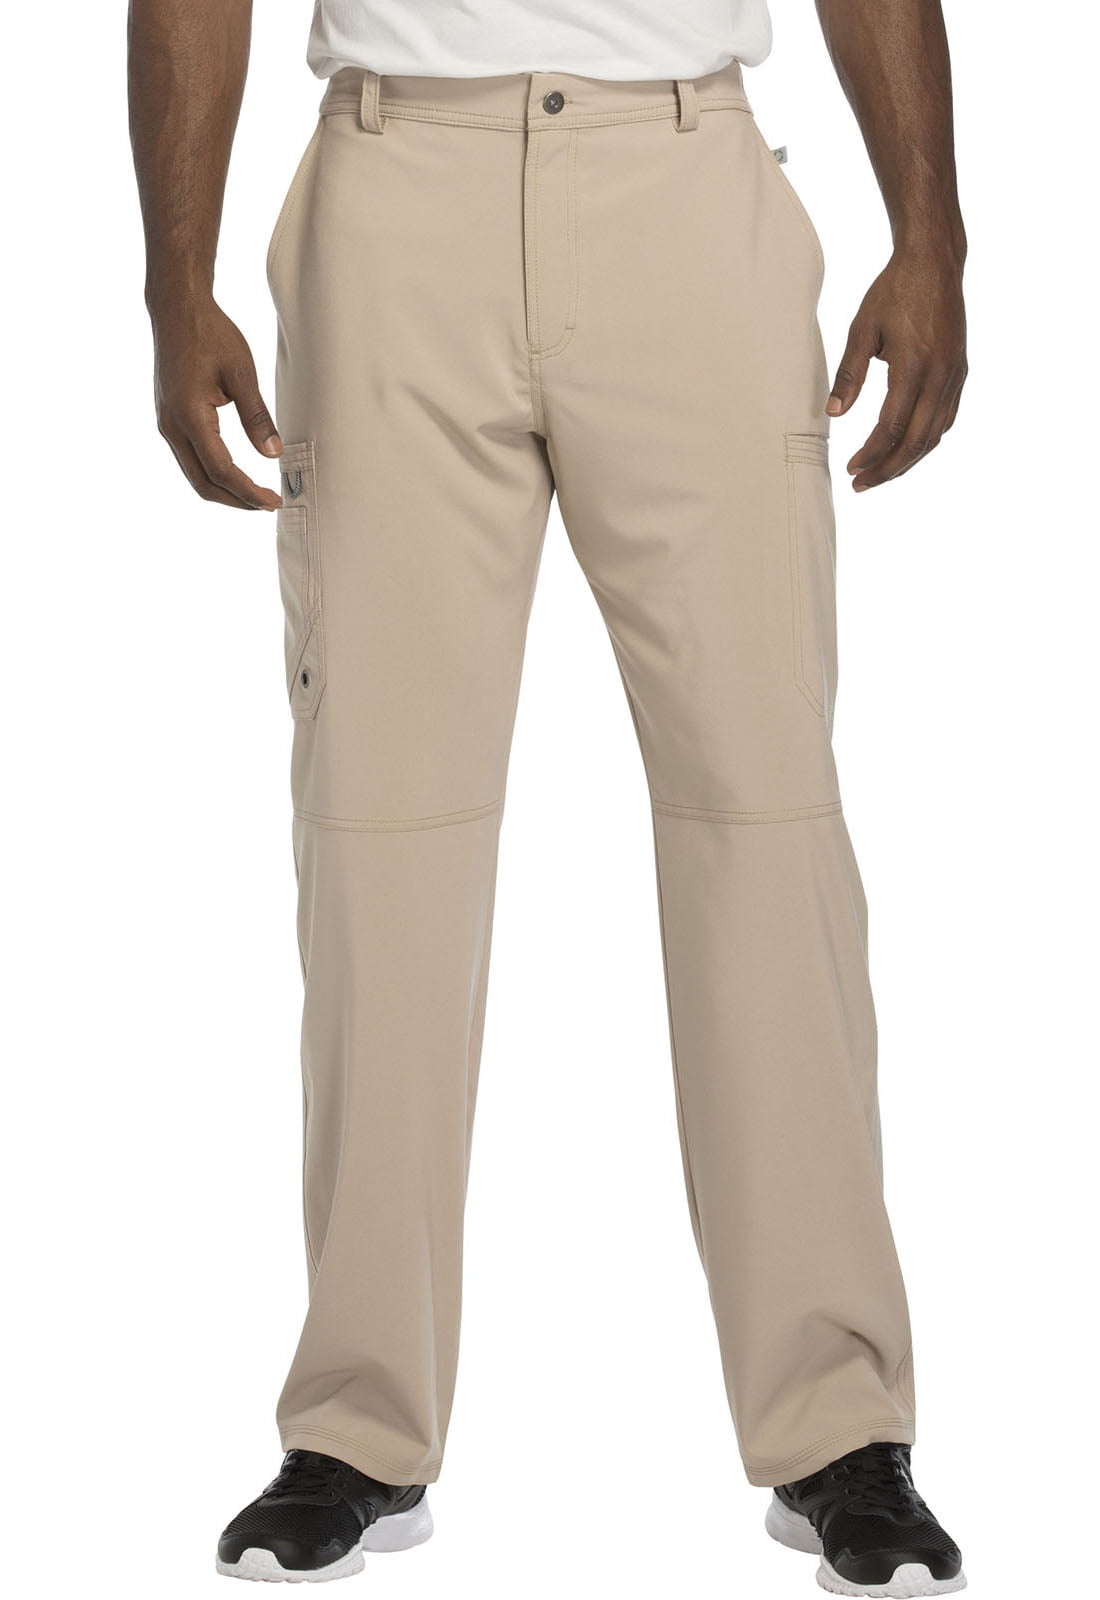 Cherokee Infinity Scrubs Men/'s TALL Fly Front Pant